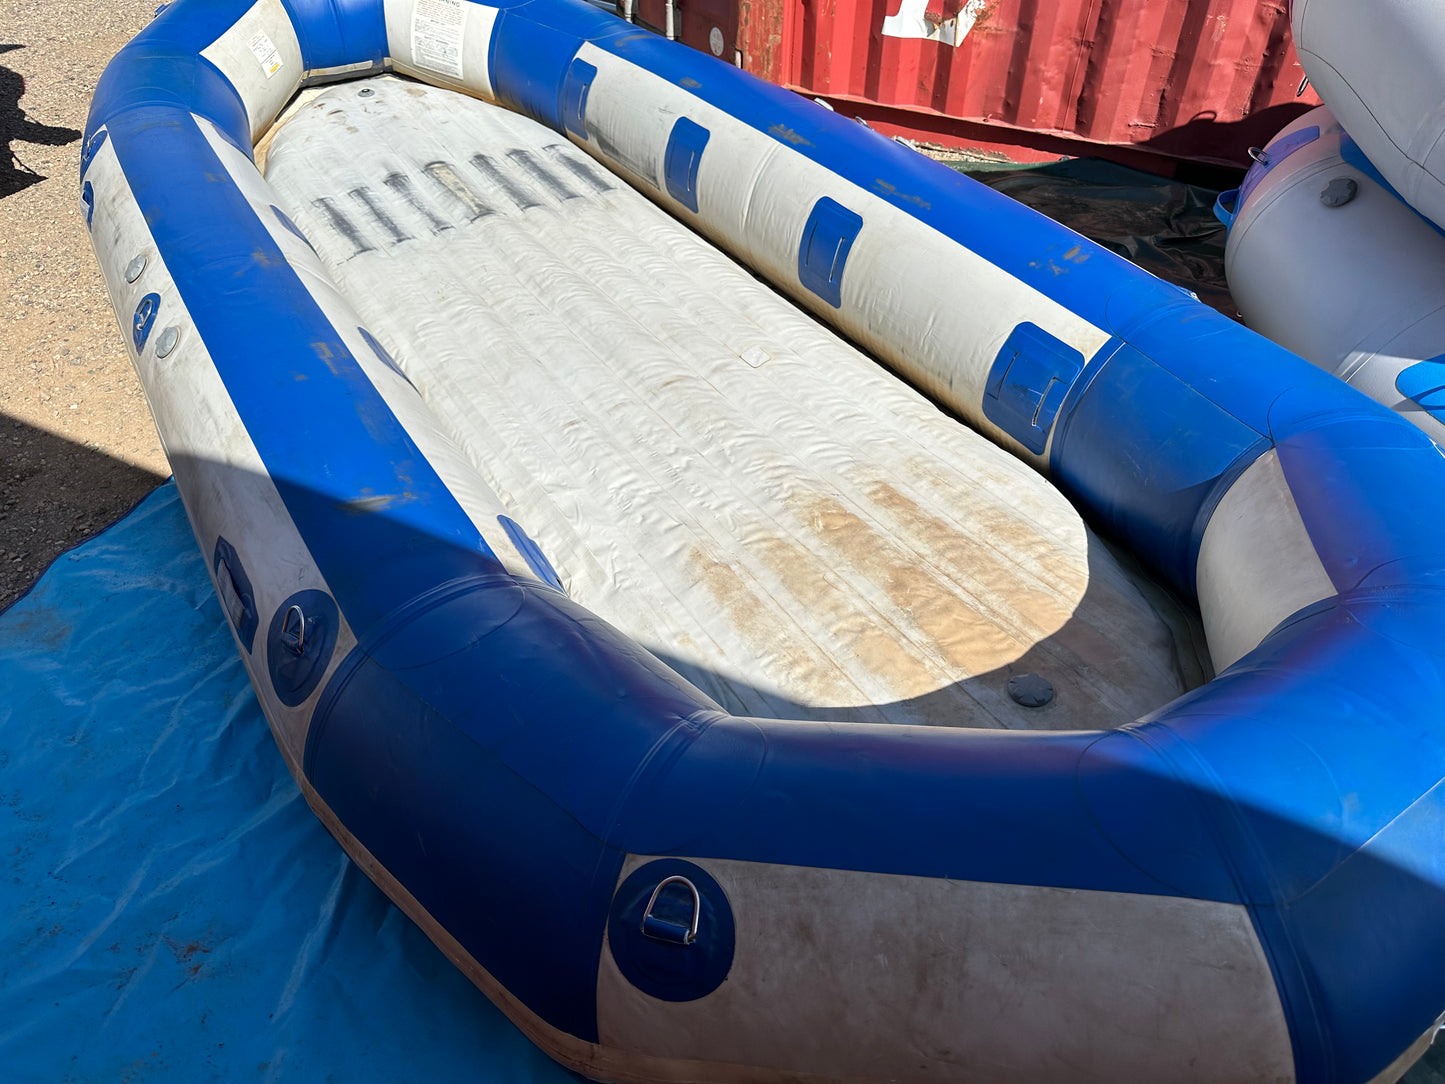 A used 16' Vanguard Raft from 2006, sitting on top of a truck.